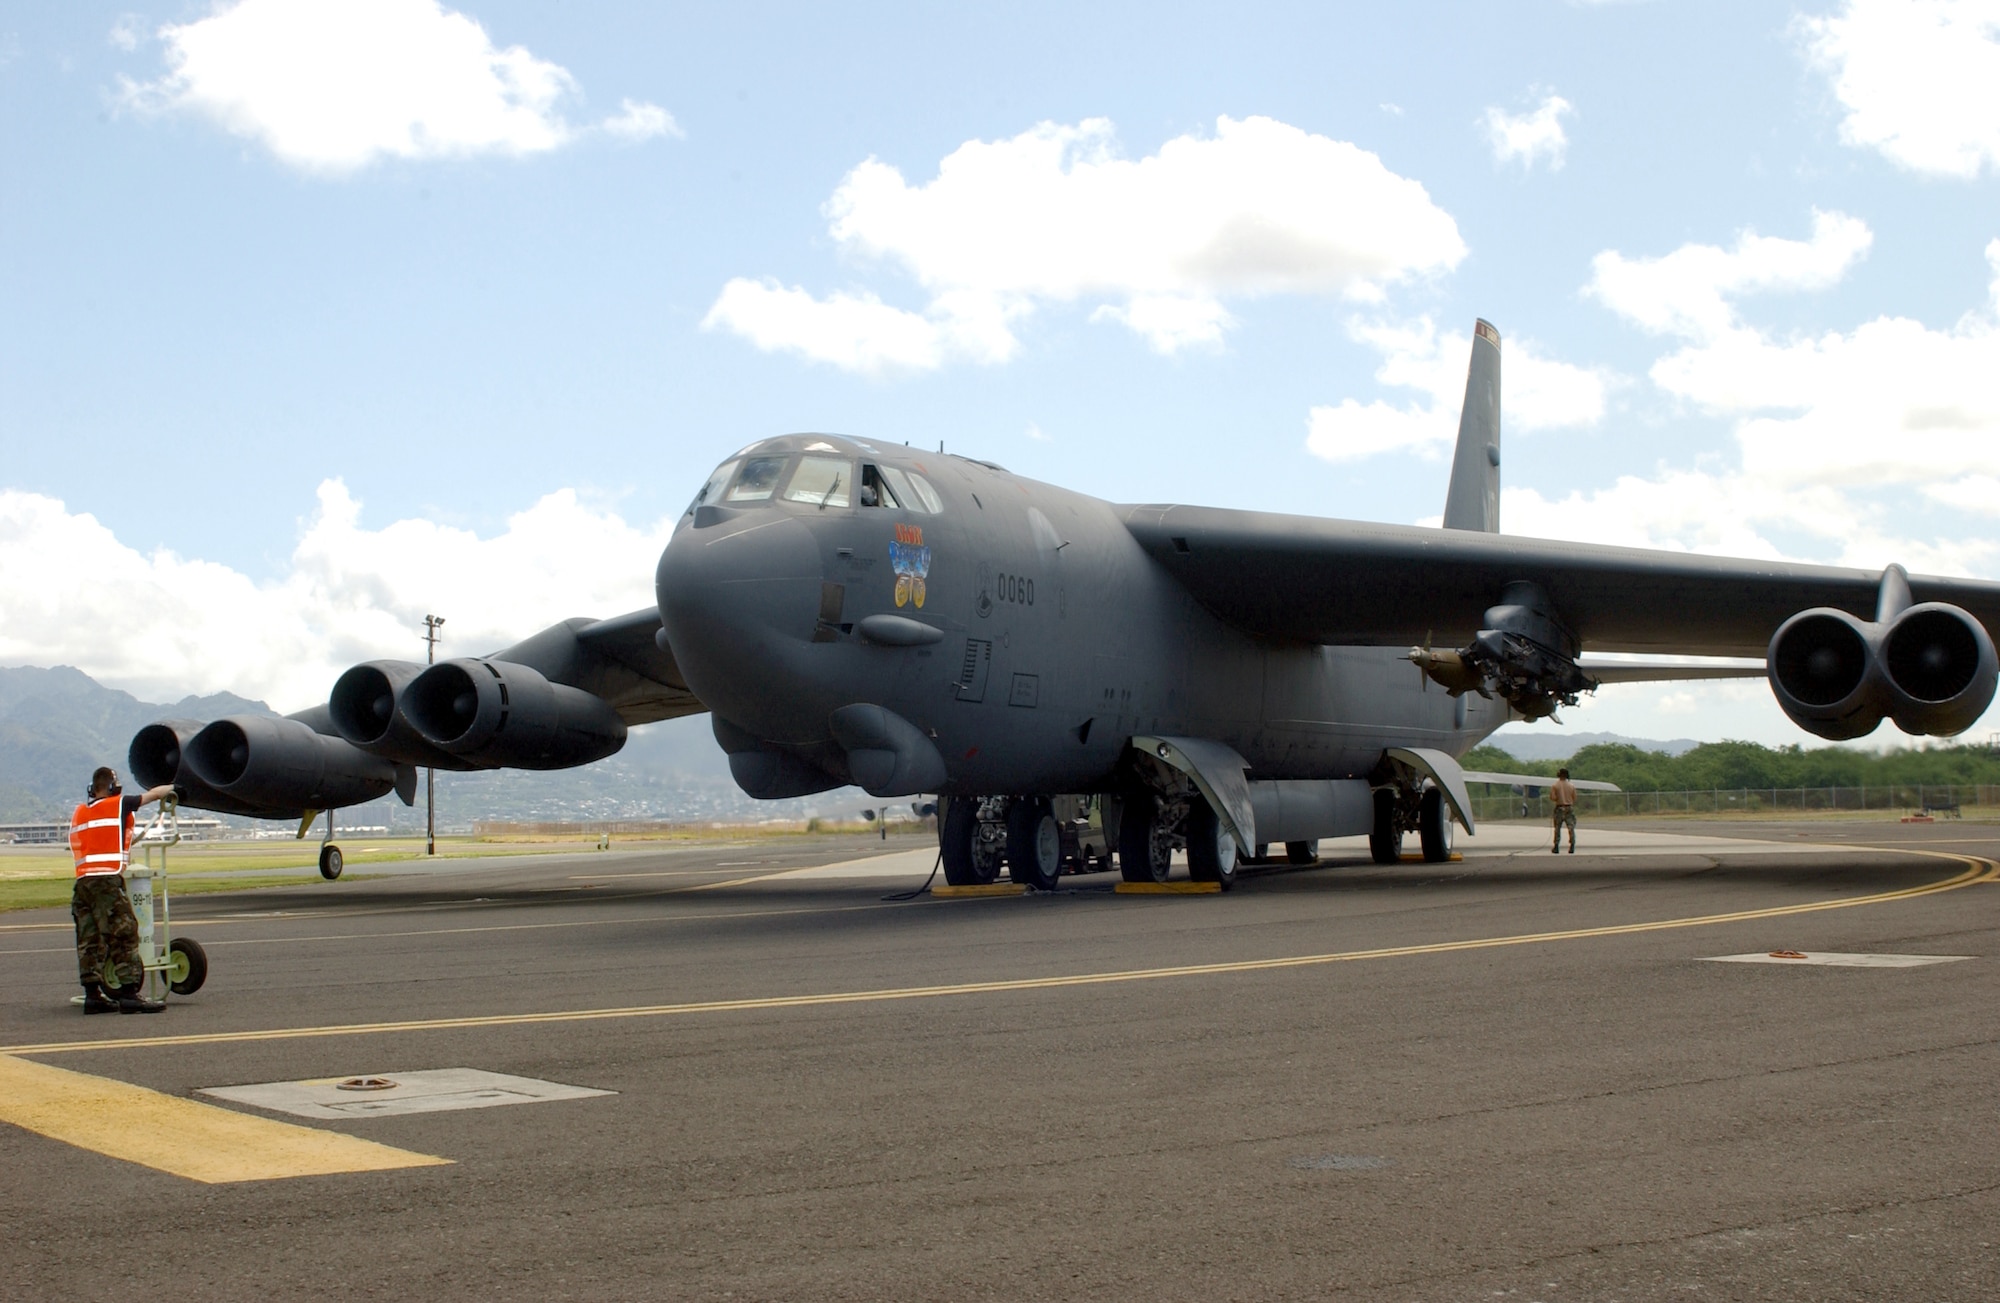 HICKAM AIR FORCE BASE, Hawaii -- A B-52 Stratofortress is prepared for take off on the runway April 6.  Four B-52s arrived here from Andersen Air Force Base, Guam, to escape Typhoon Sudal which missed the island April 7.  The B-52s are deployed to Andersen from Minot AFB, N.D.  (U.S. Air Force photo by Mike Dey)